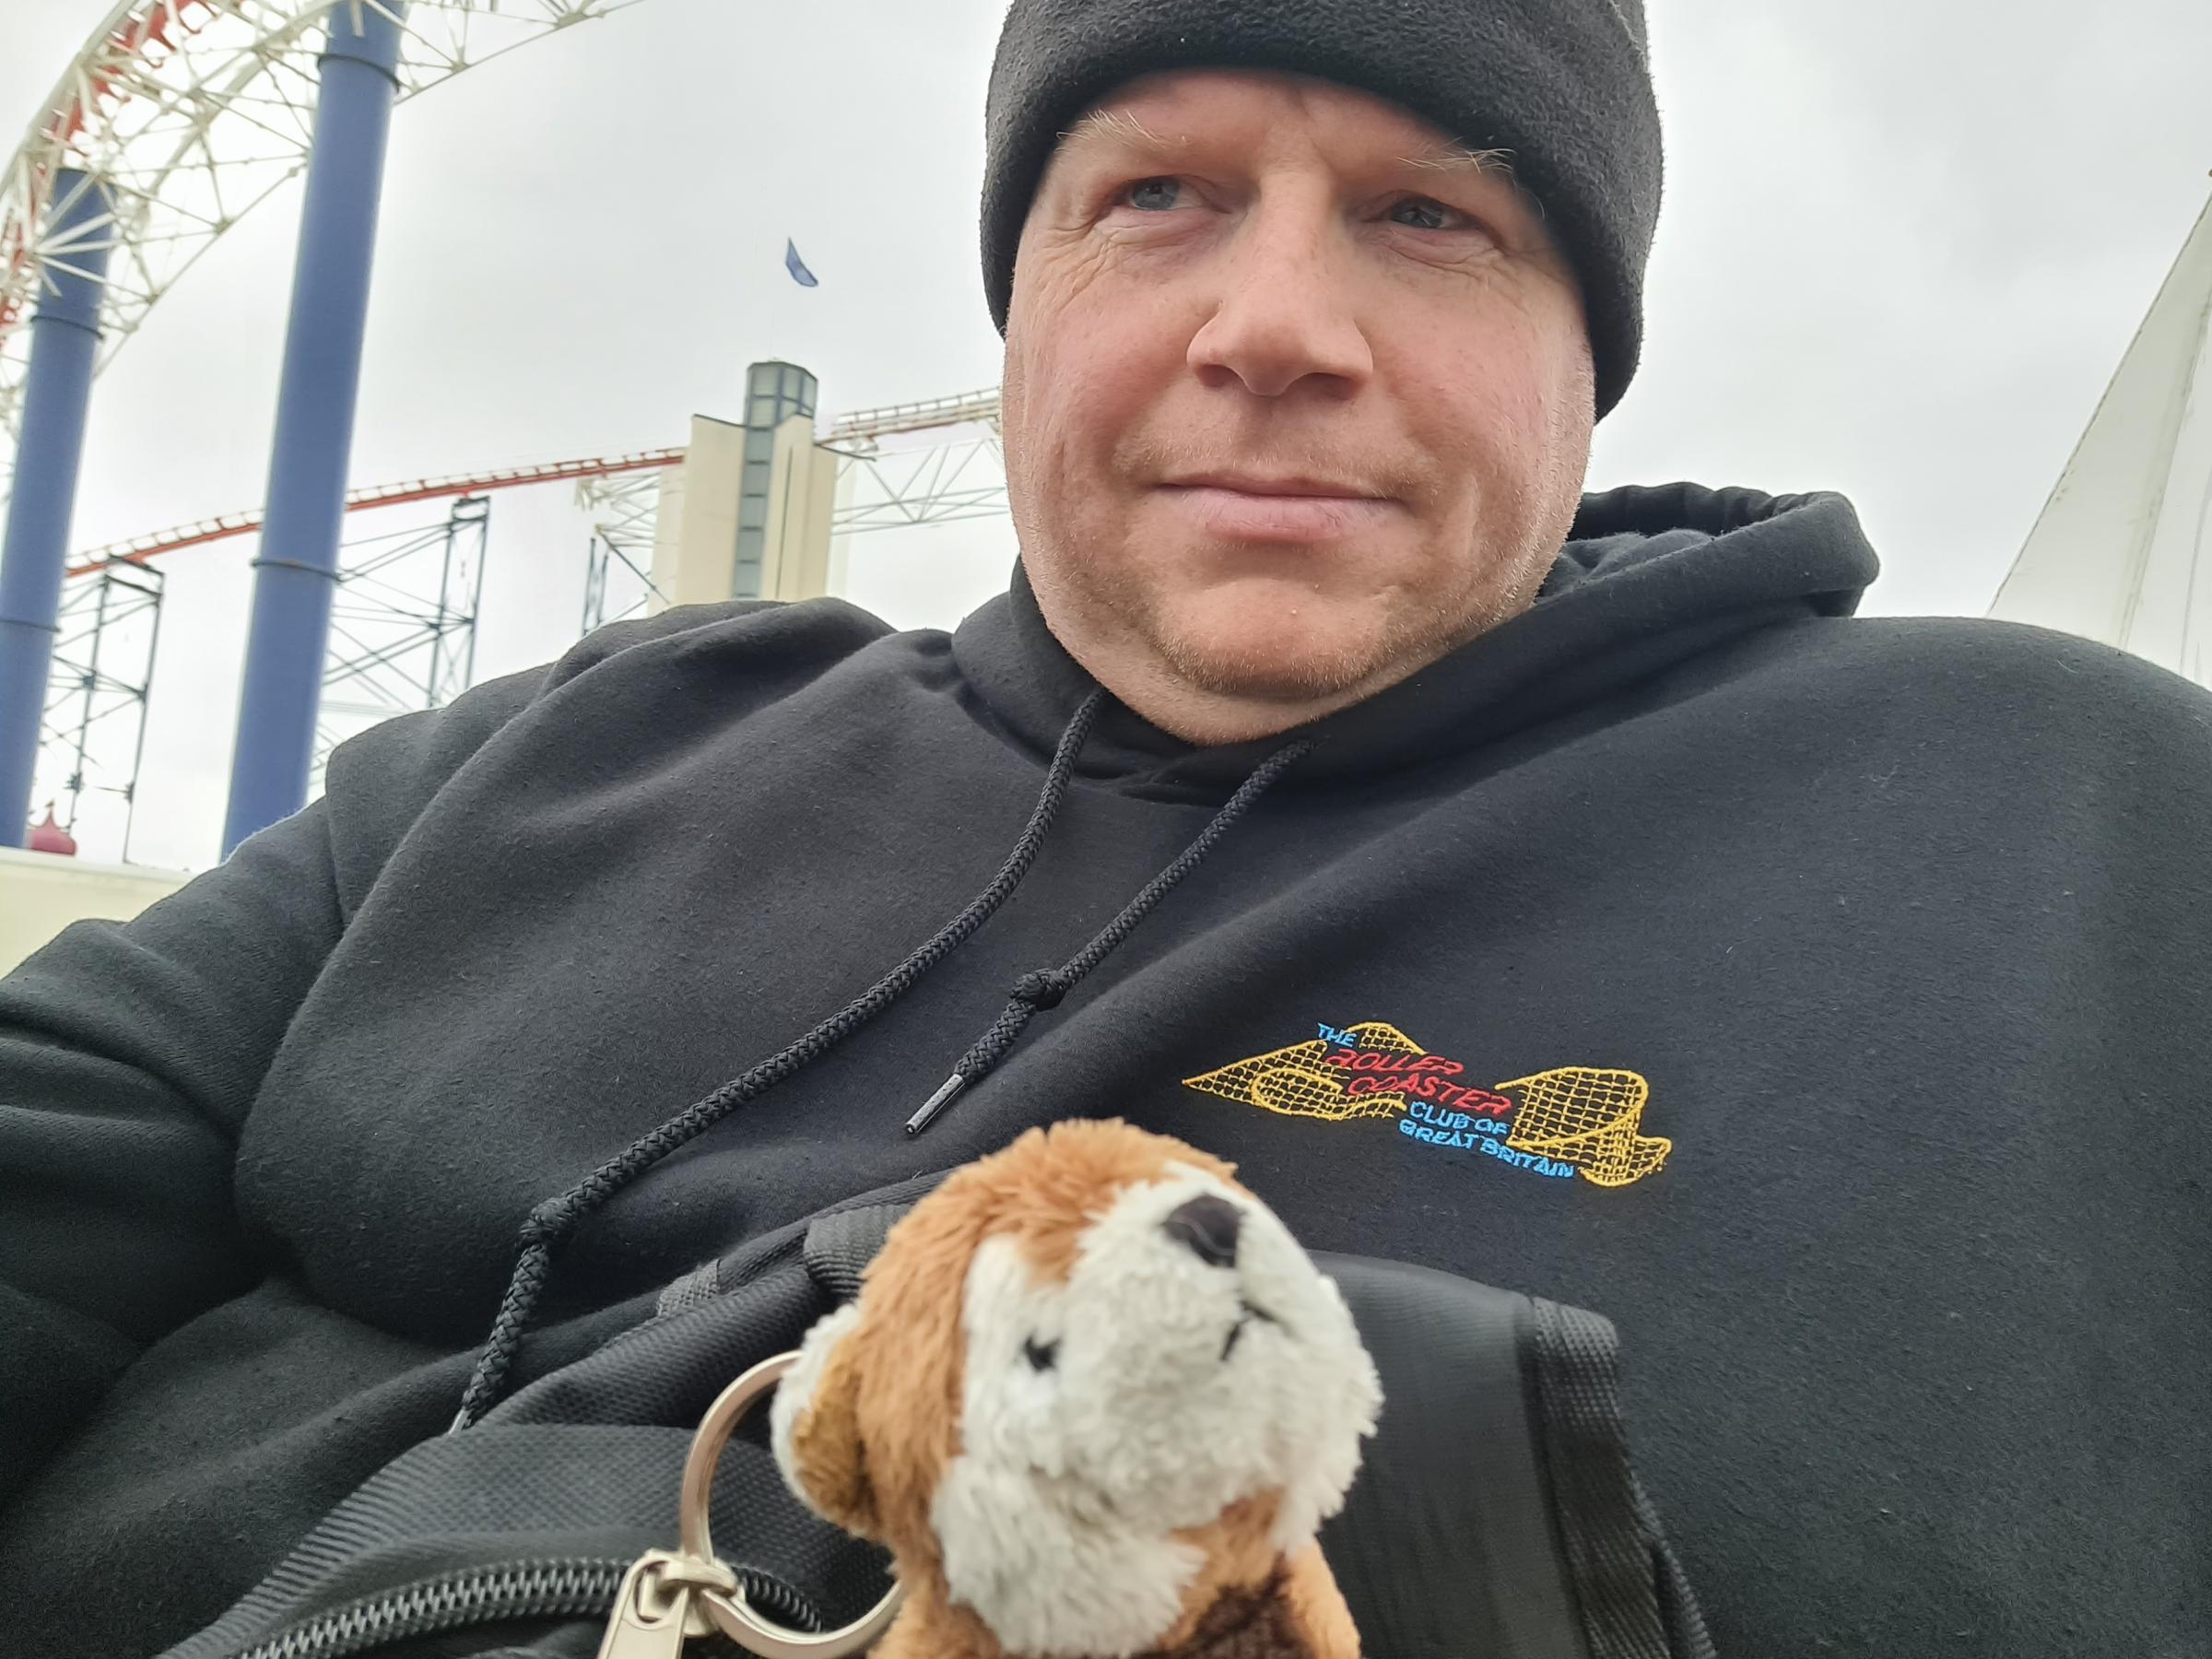 Andrew Bond with RP, his red panda travelling companion which goes everywhere on his travels, attached to his backpack/camera bag.